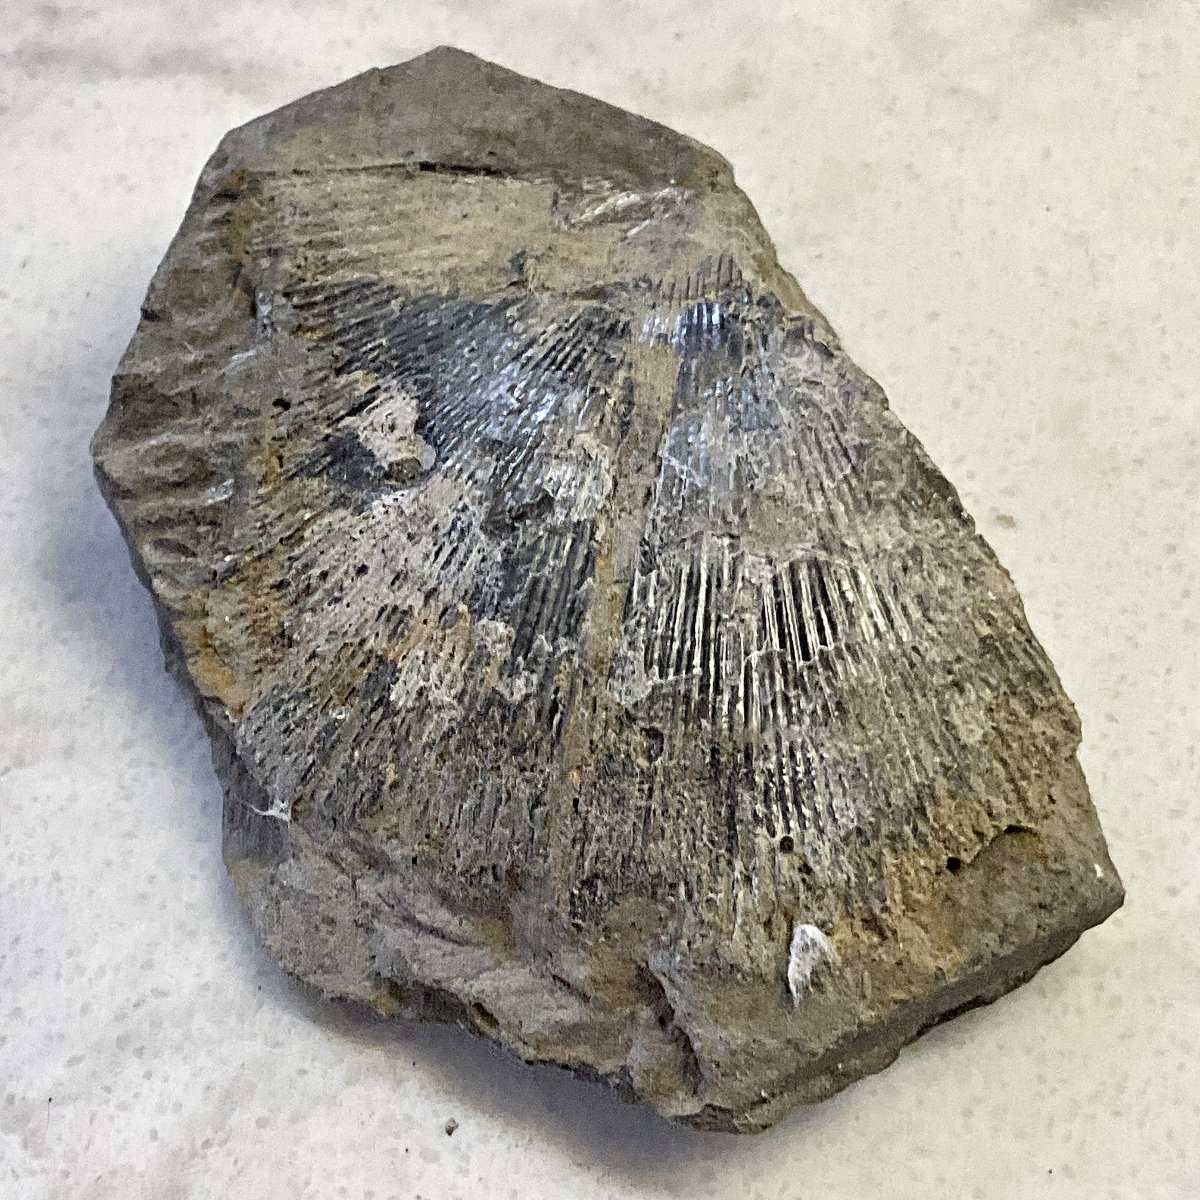 Strophomenid Brachiopod from the Rochester Shale